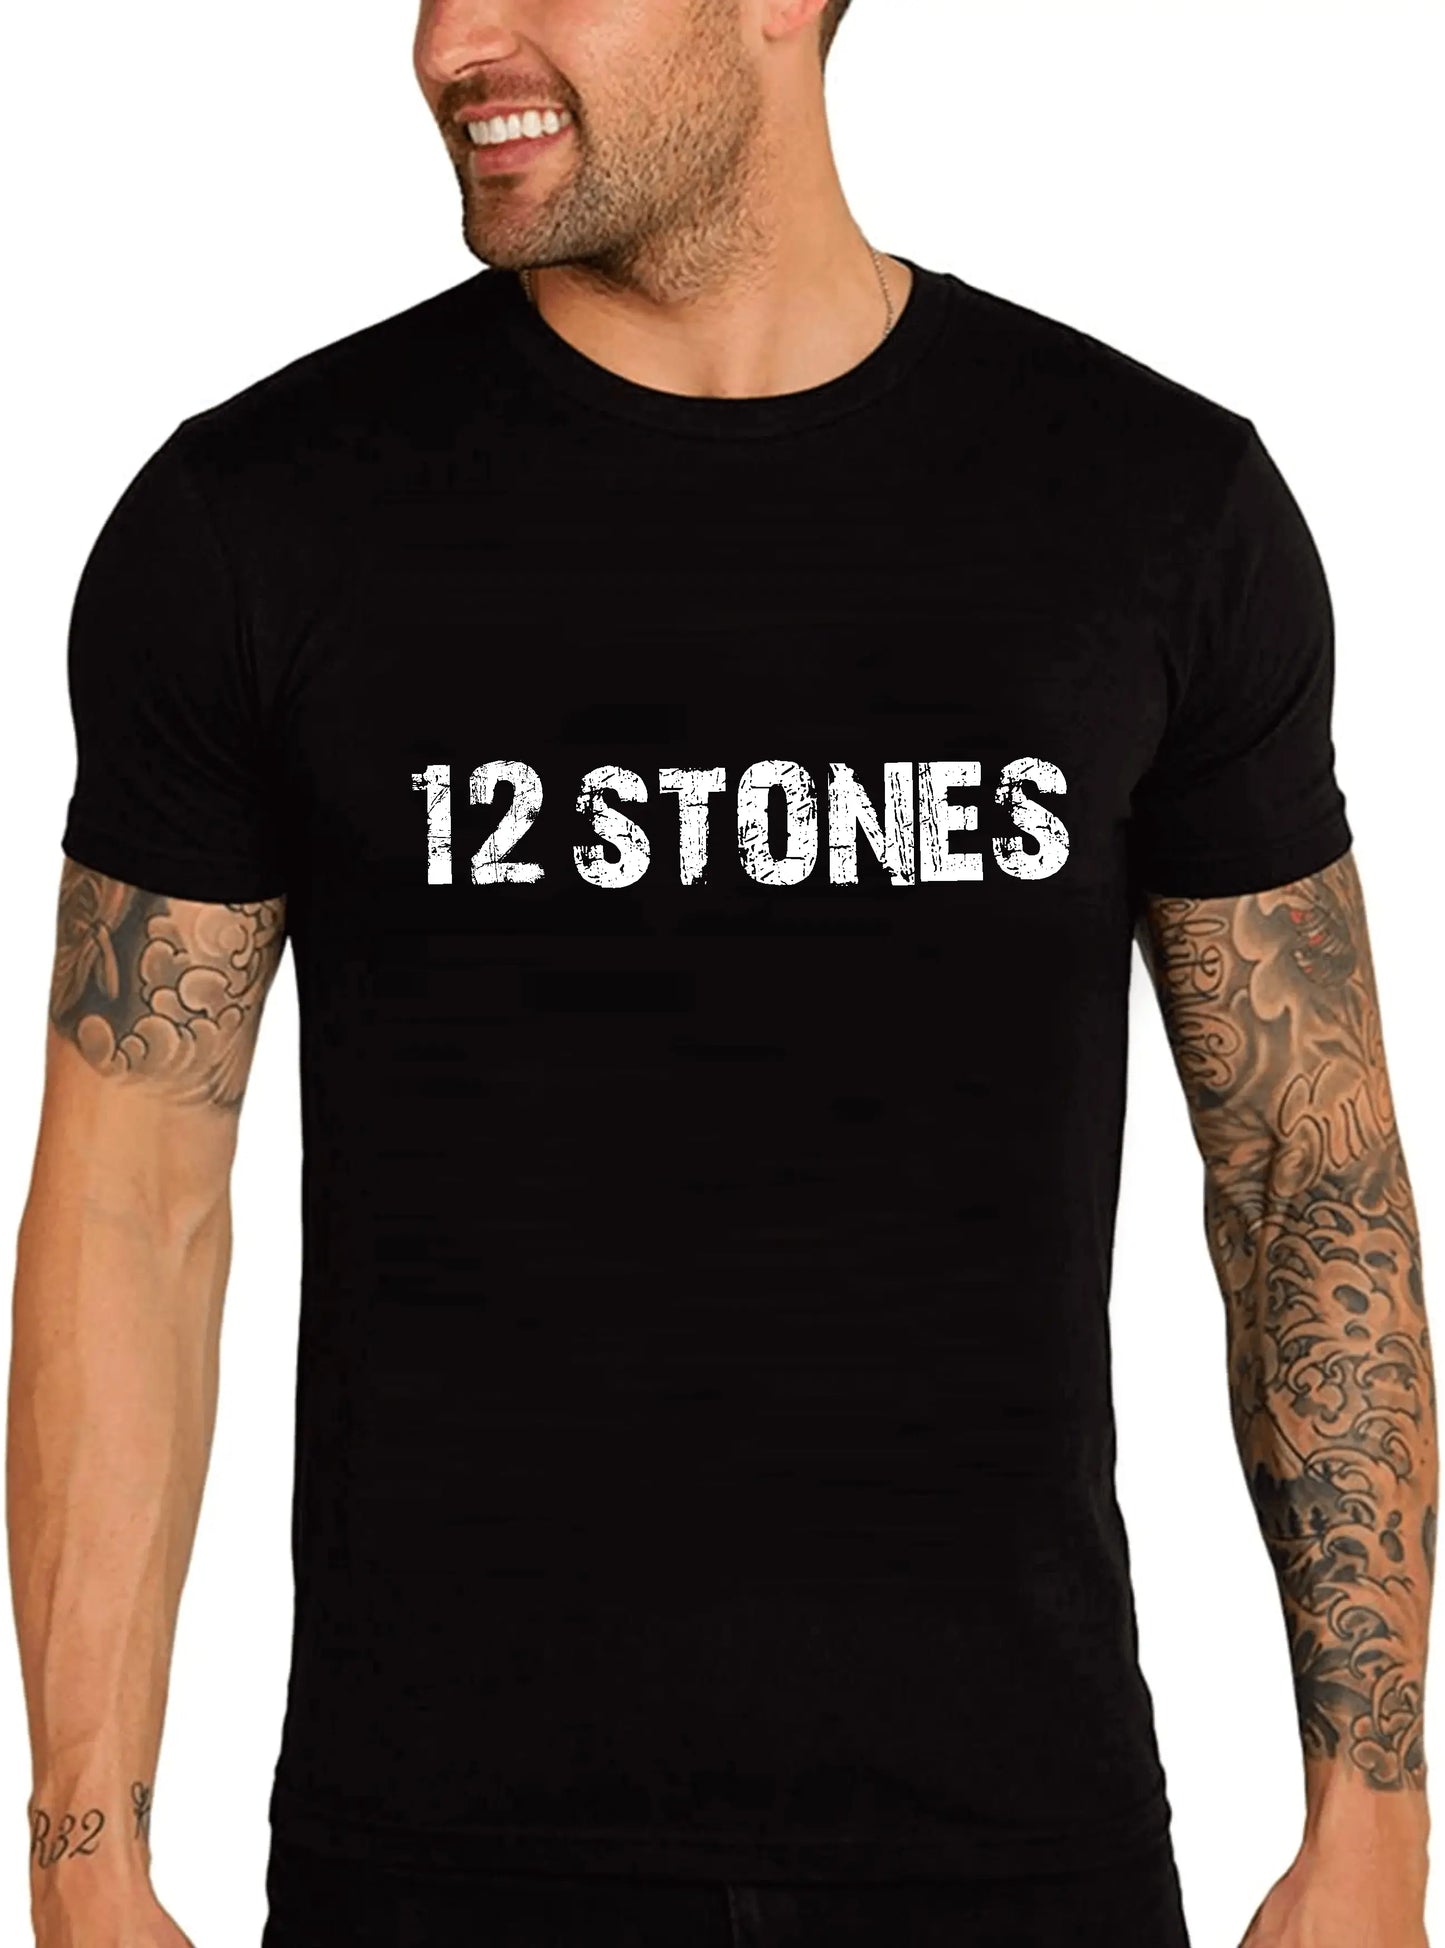 Men's Graphic T-Shirt 12 Stones 12nd Birthday Anniversary 12 Year Old Gift 2012 Vintage Eco-Friendly Short Sleeve Novelty Tee